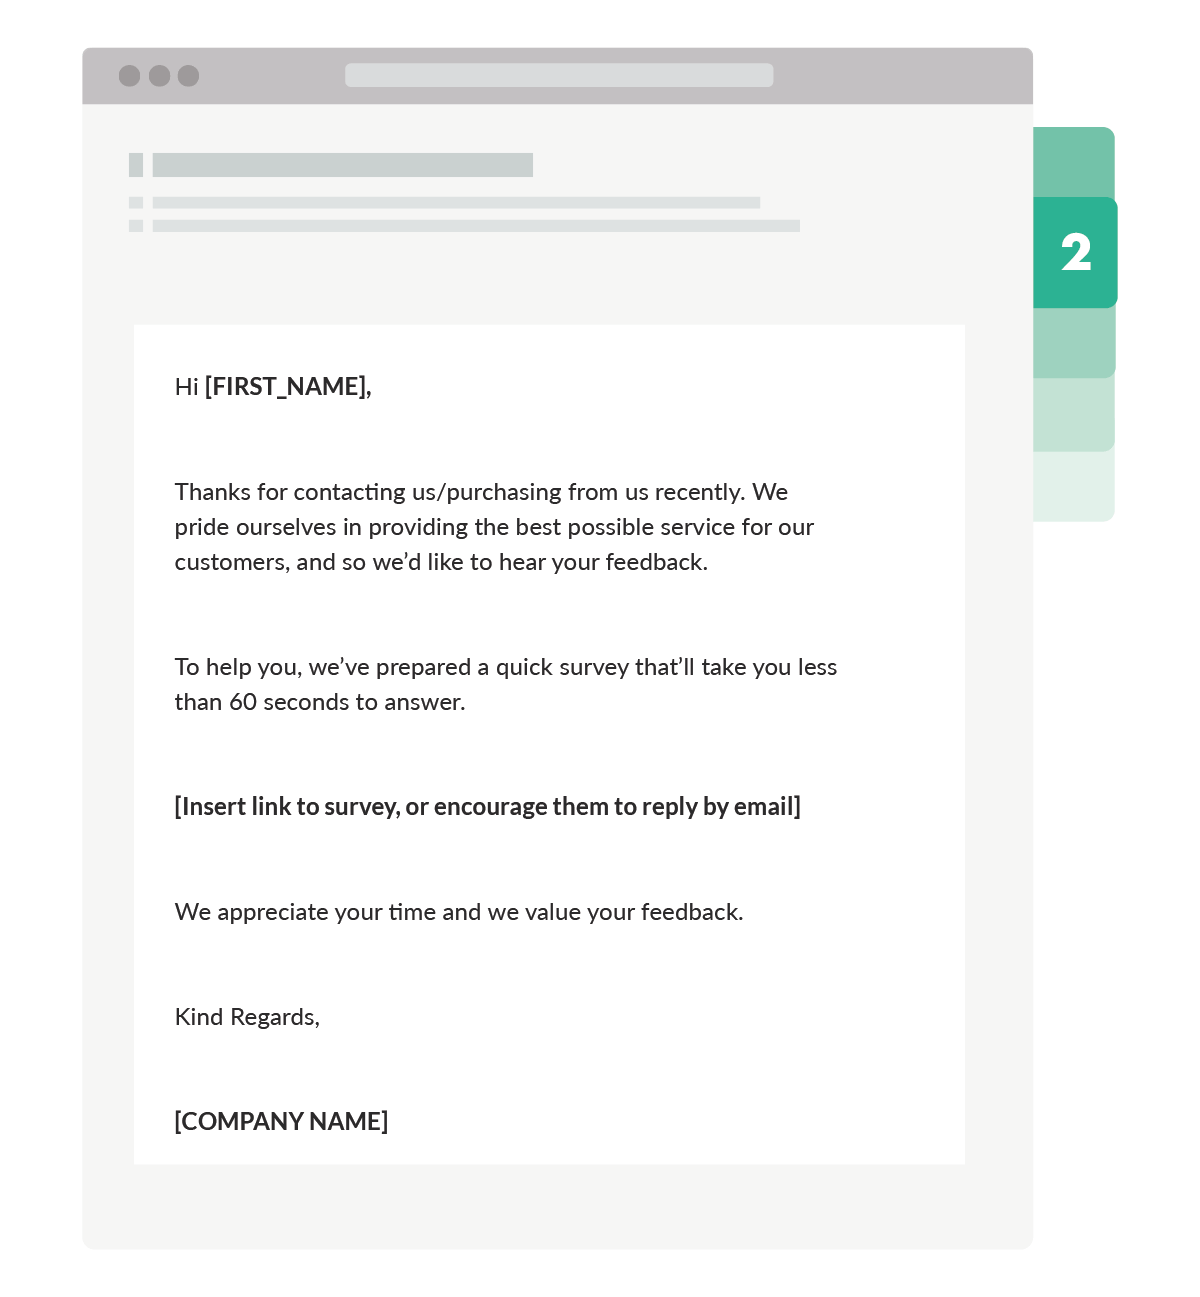 The ‘Survey’ follow-up email